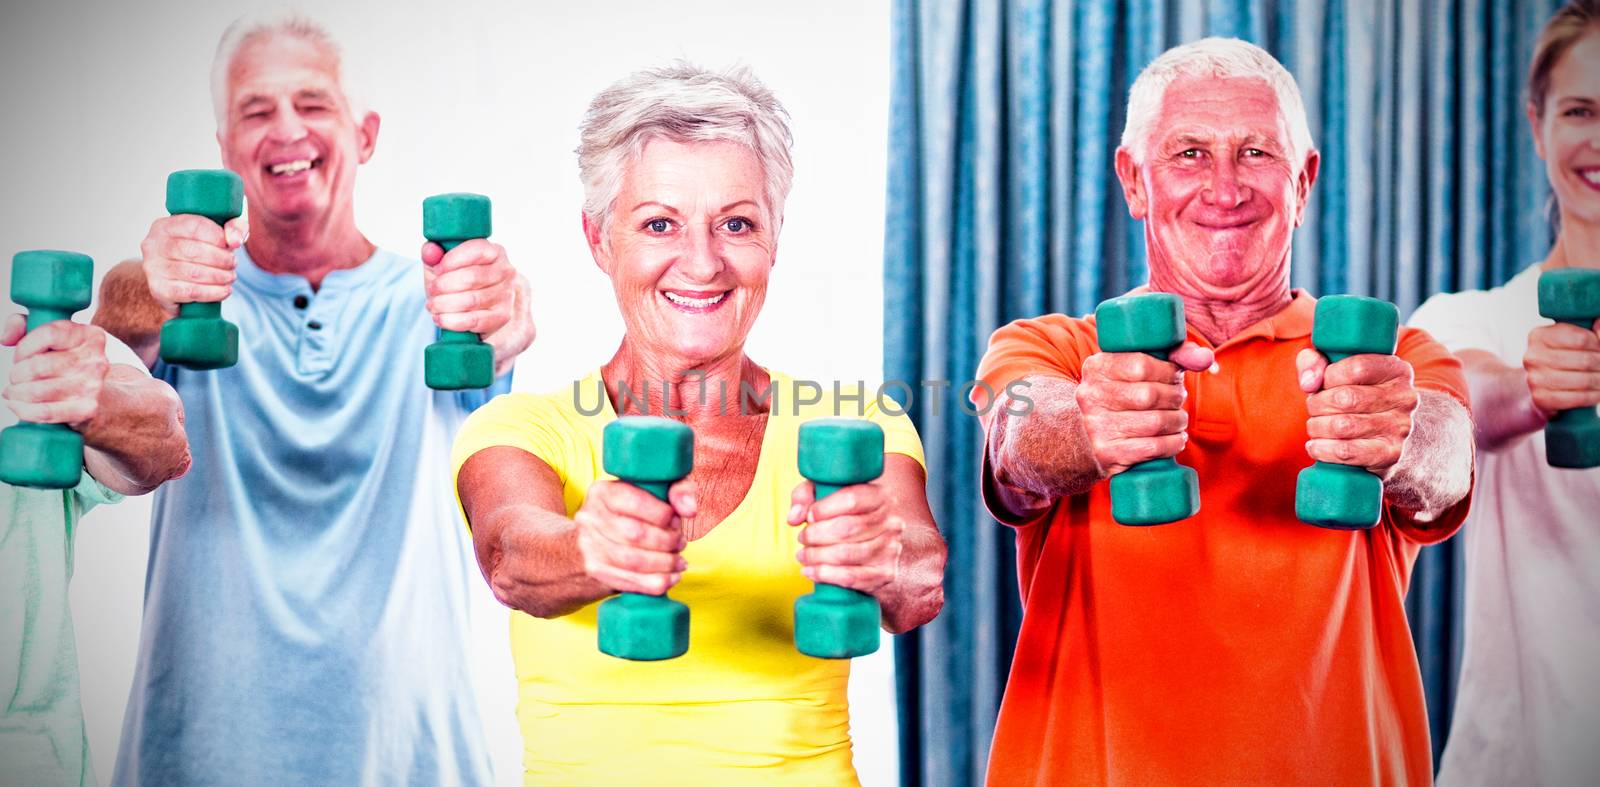 Portrait of seniors exercising with weights by Wavebreakmedia